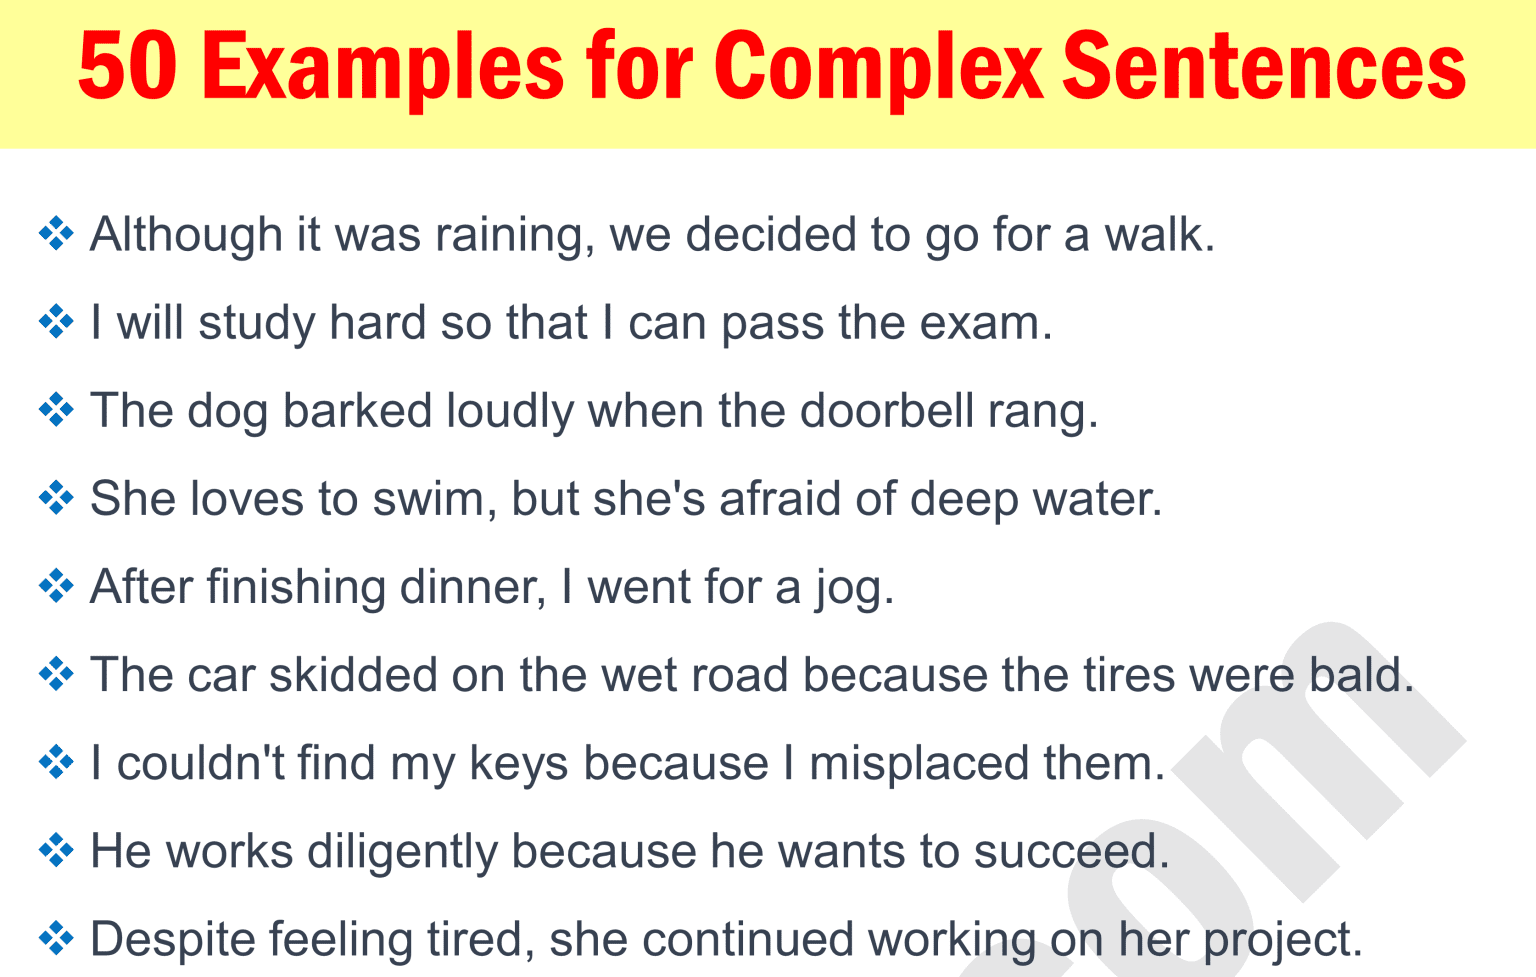 50-complex-sentences-examples-in-english-ilmrary